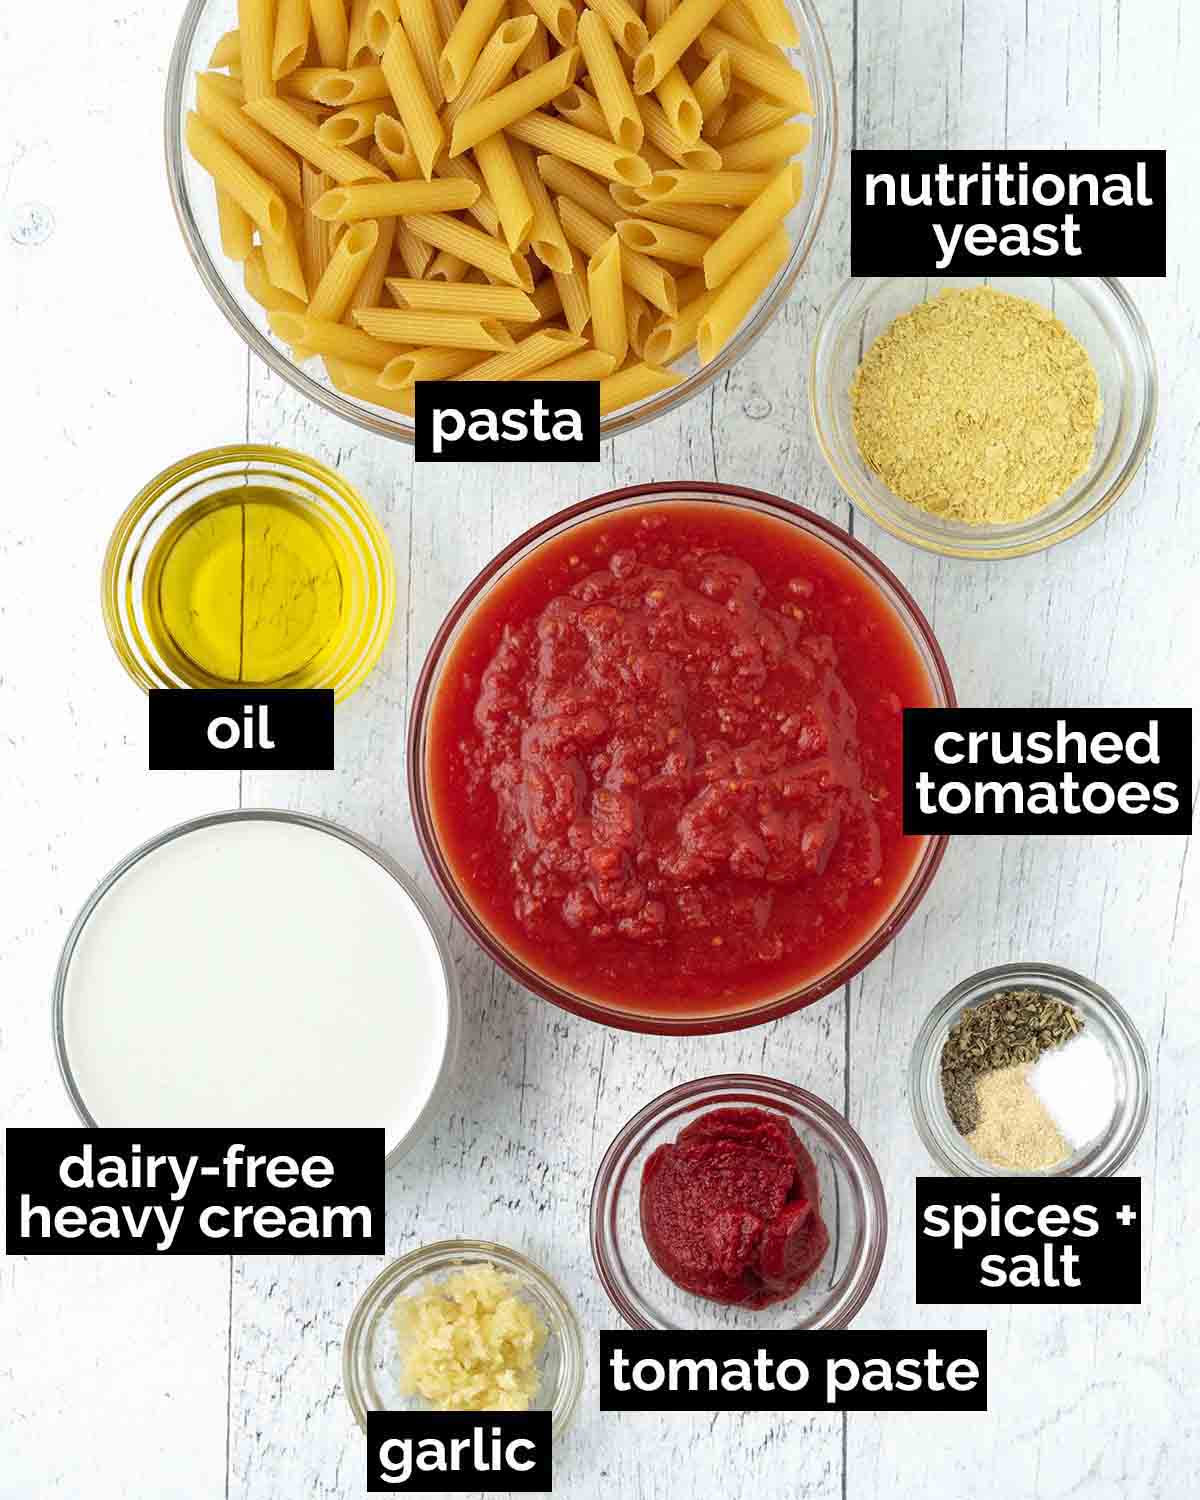 An overhead shot showing the ingredients needed to make vegan tomato pasta.